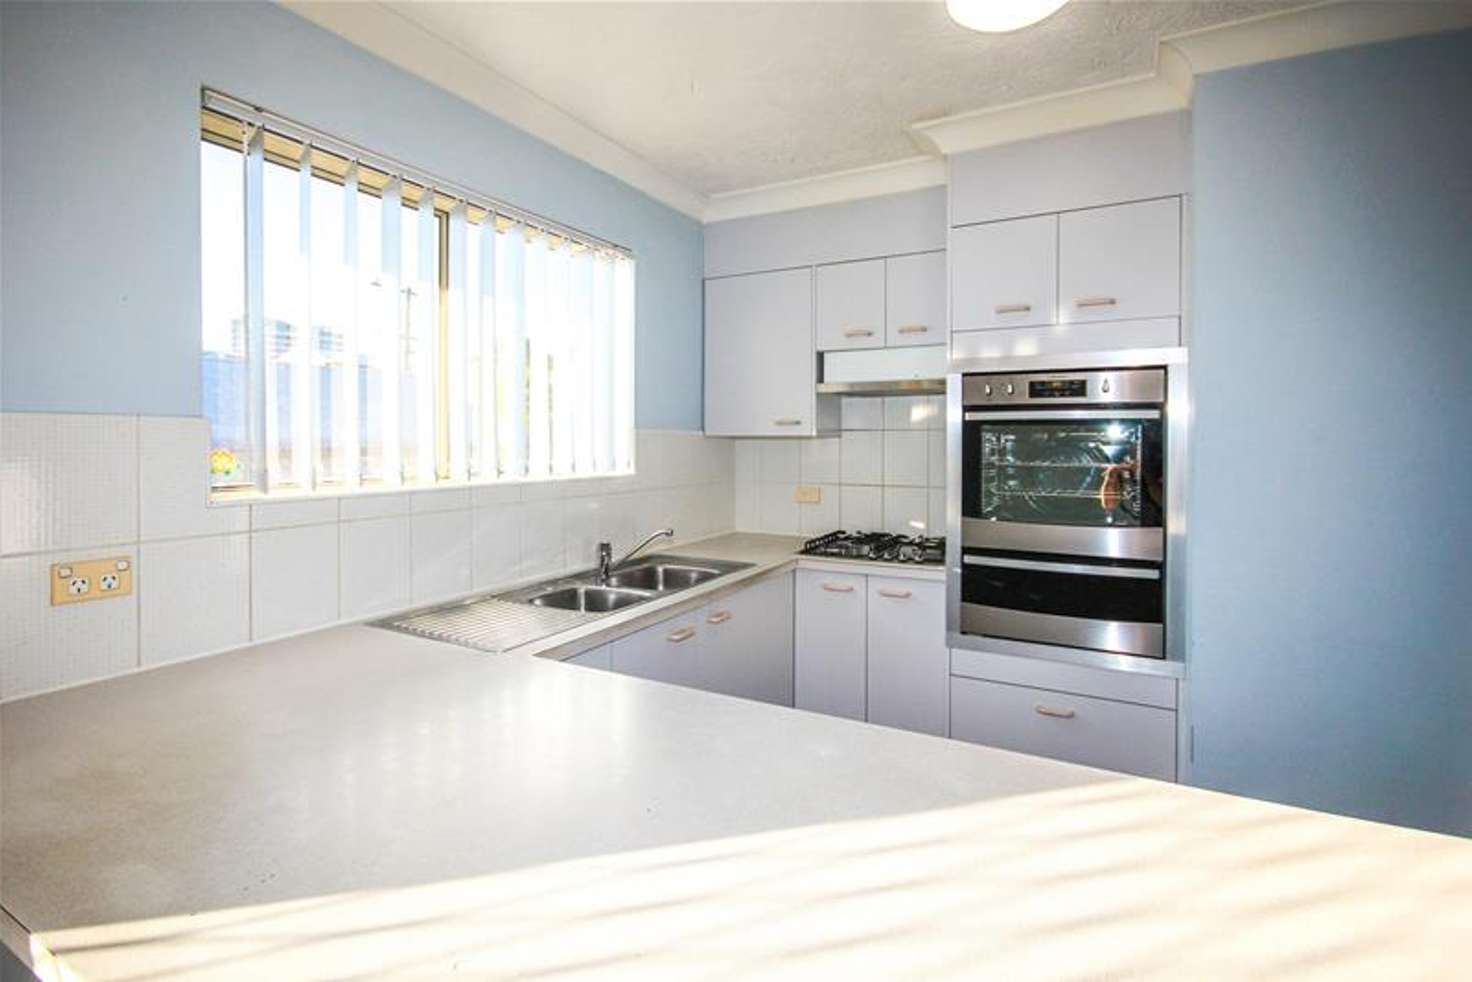 Main view of Homely apartment listing, 5/39 Mansfield Street, Coorparoo QLD 4151